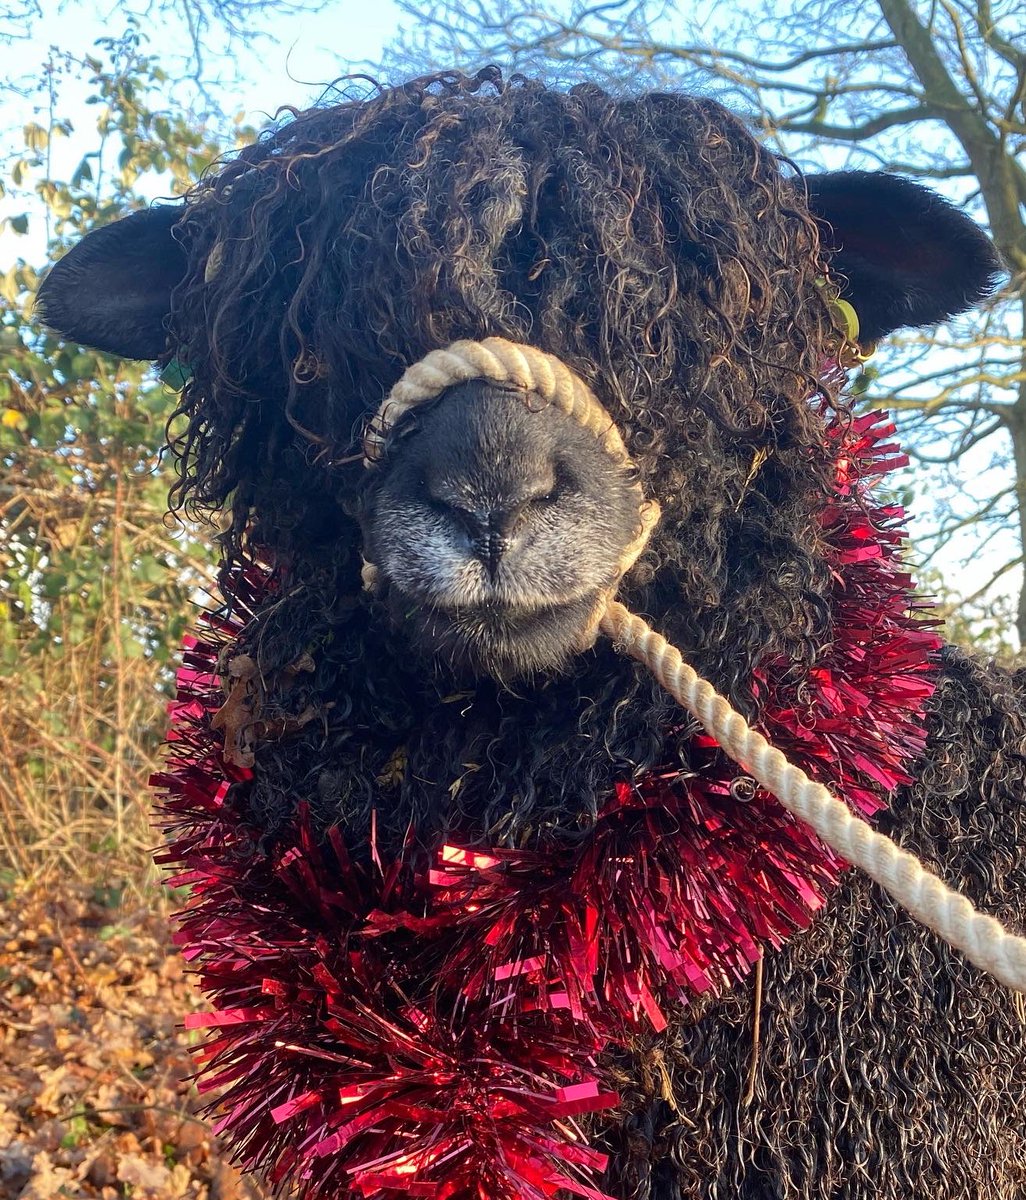 Merry Christmas from this pair of Lincoln Longwools. Does anyone else decorate their livestock? We’d love to see your best pictures!

#sheep #longwool #lincolnlongwool #christmas #rbst #gonative #forthefuture #youngrbst